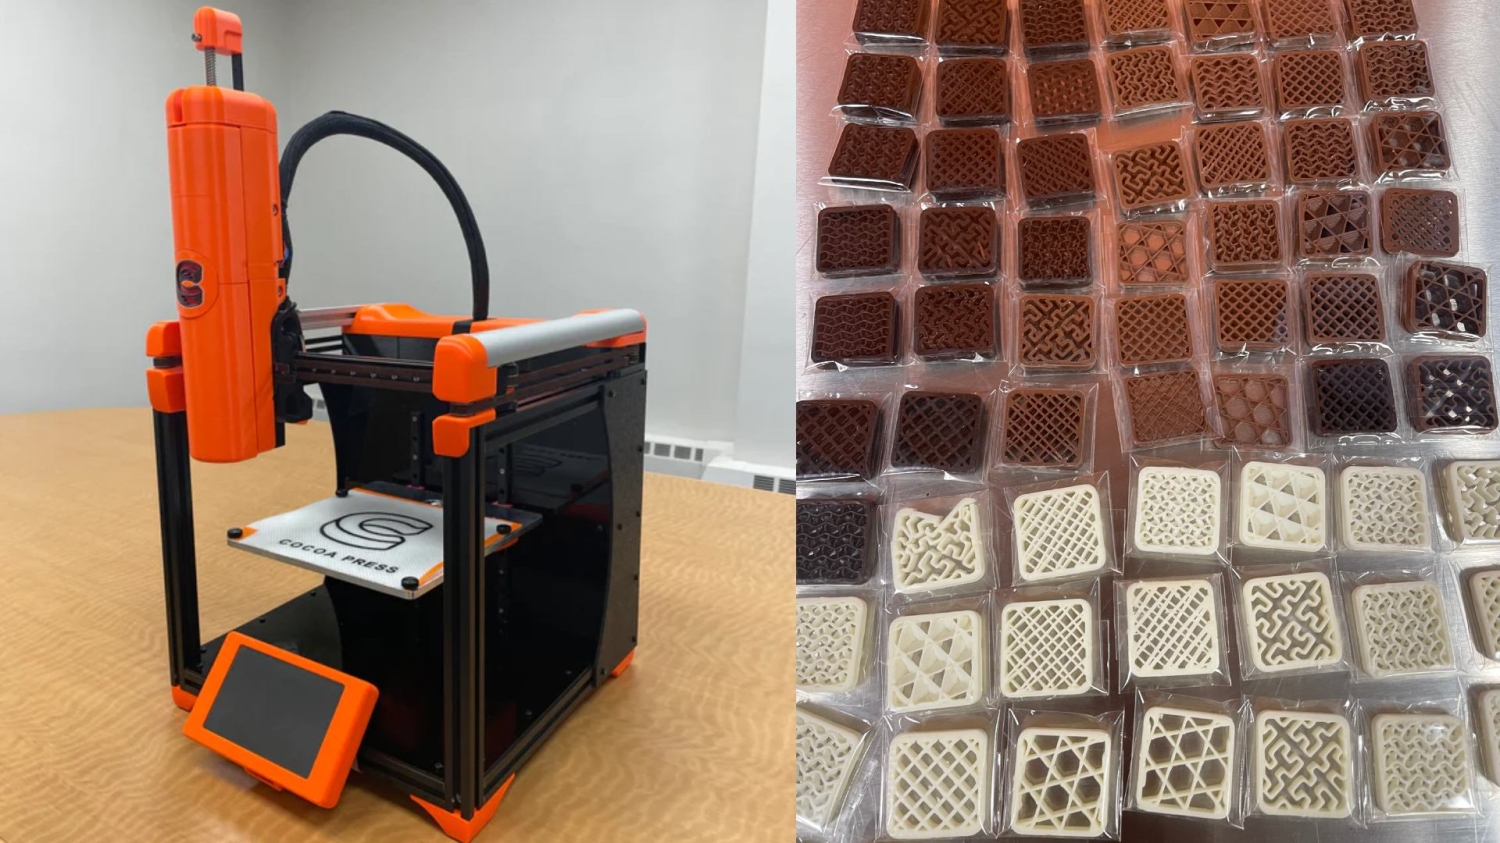 TweakTown Enlarged Image - The Cocoa Press 3D chocolate printer, image credit: Cocoa Press/MandicReally